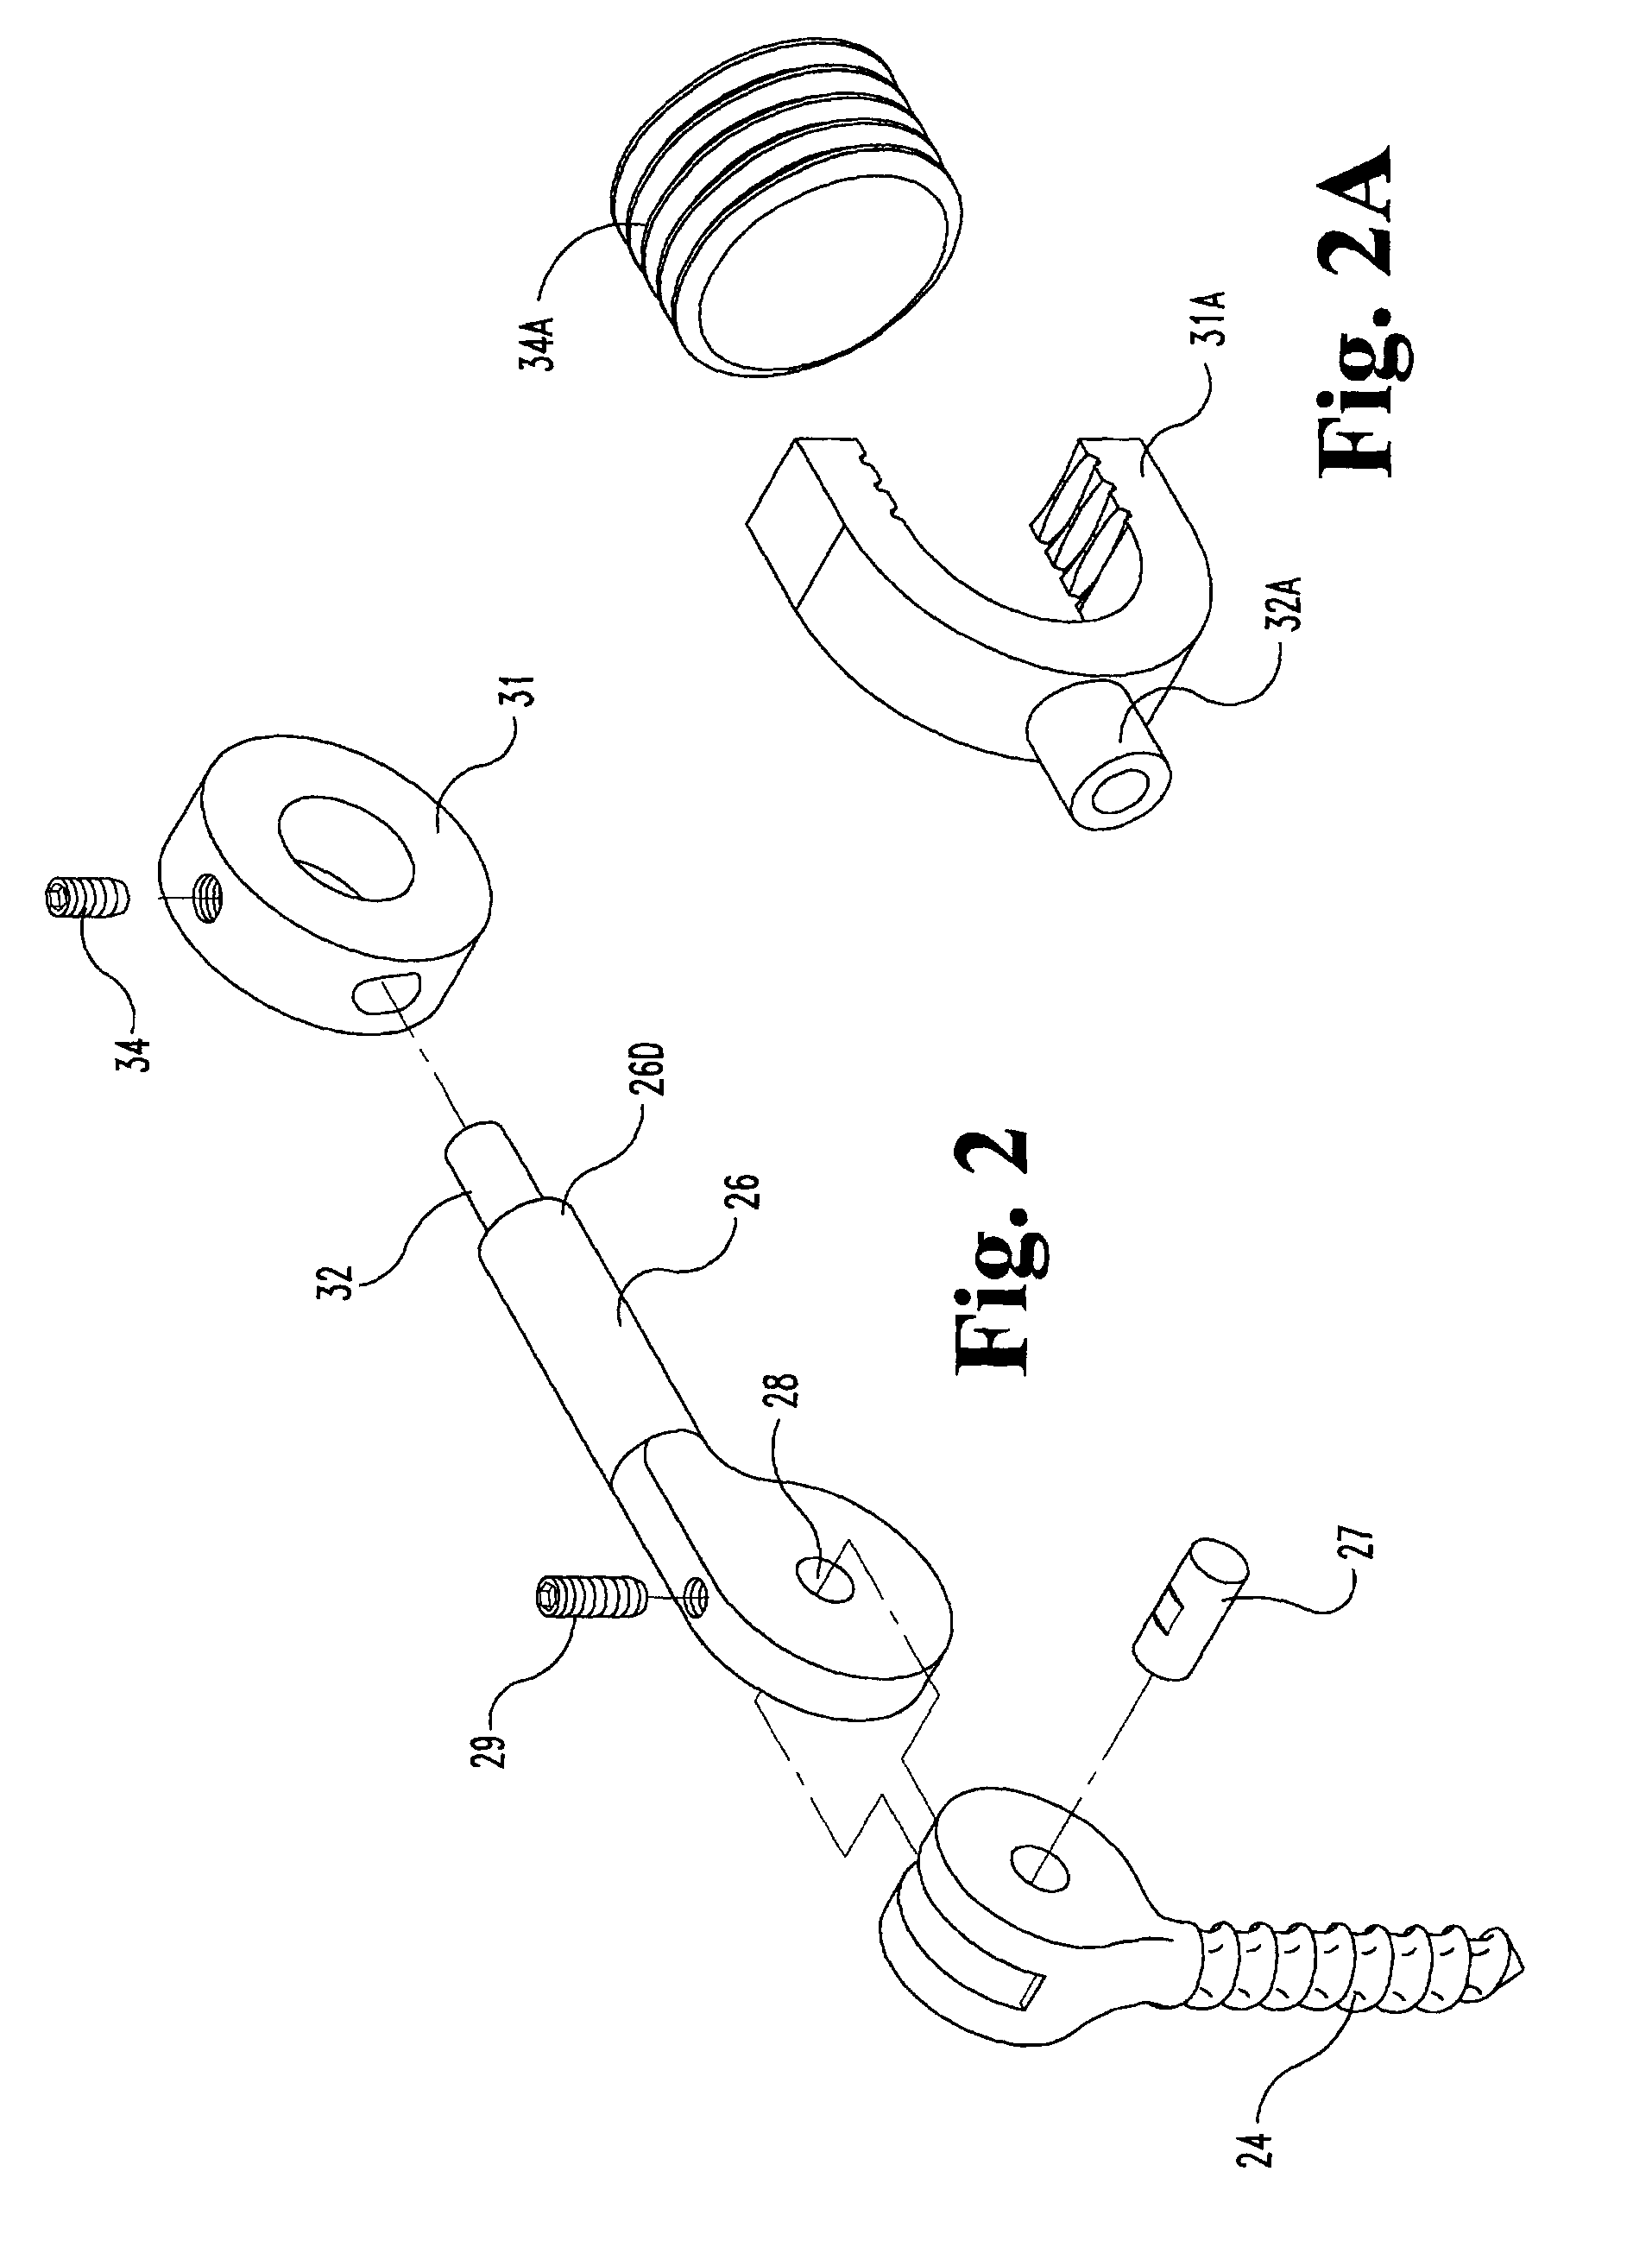 Spinal fixation system and related methods